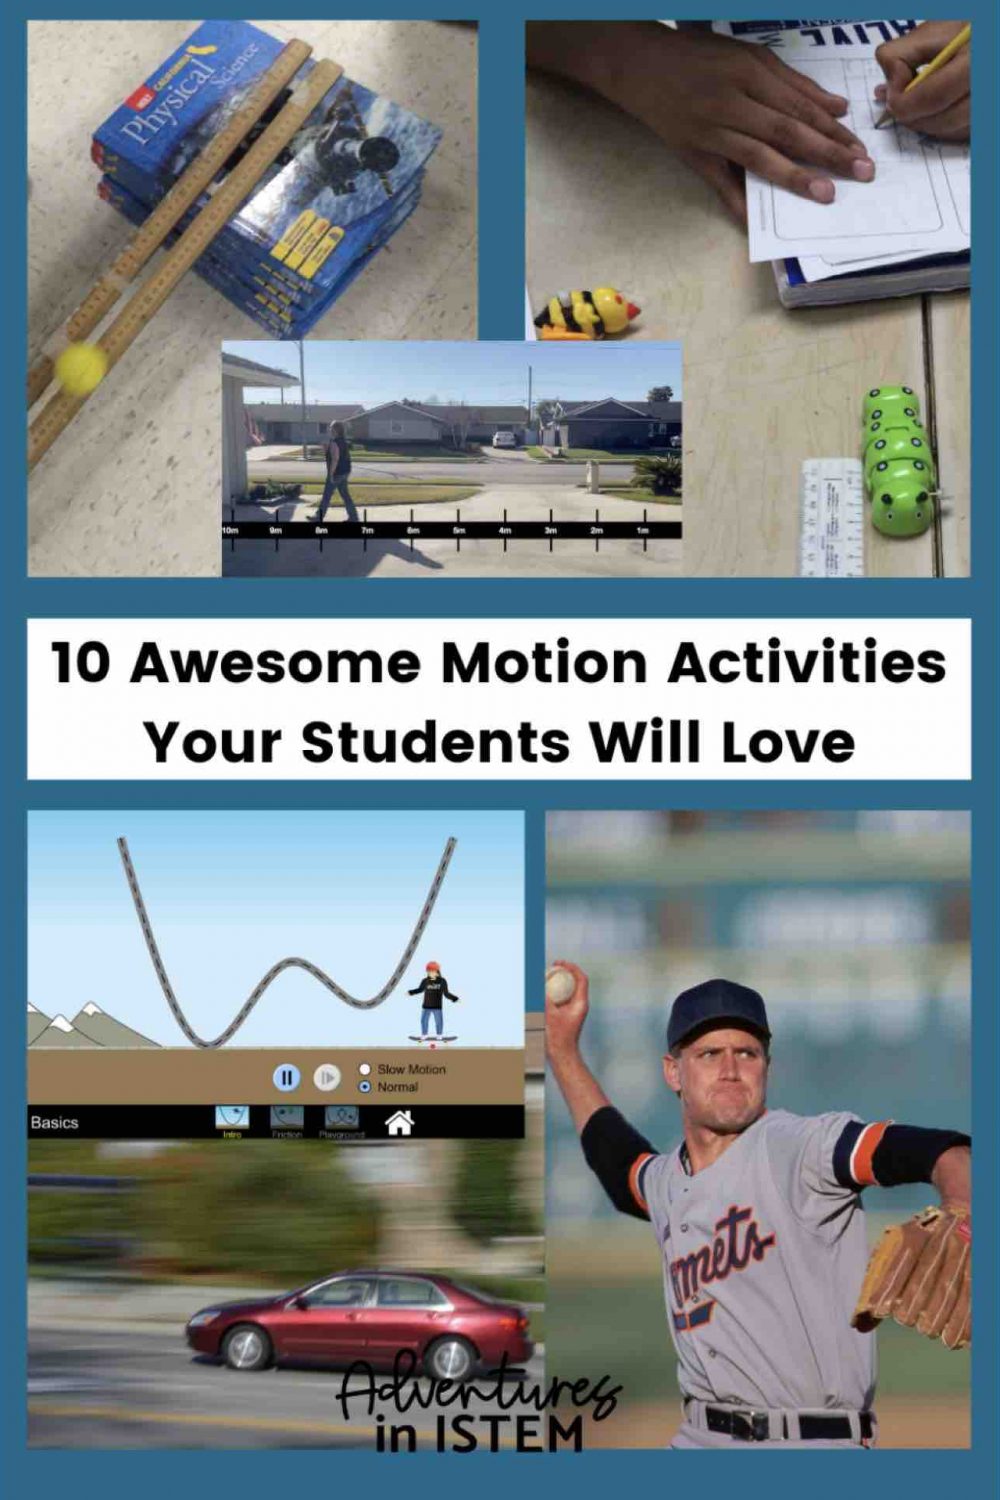 10 awesome motion activities your students will love